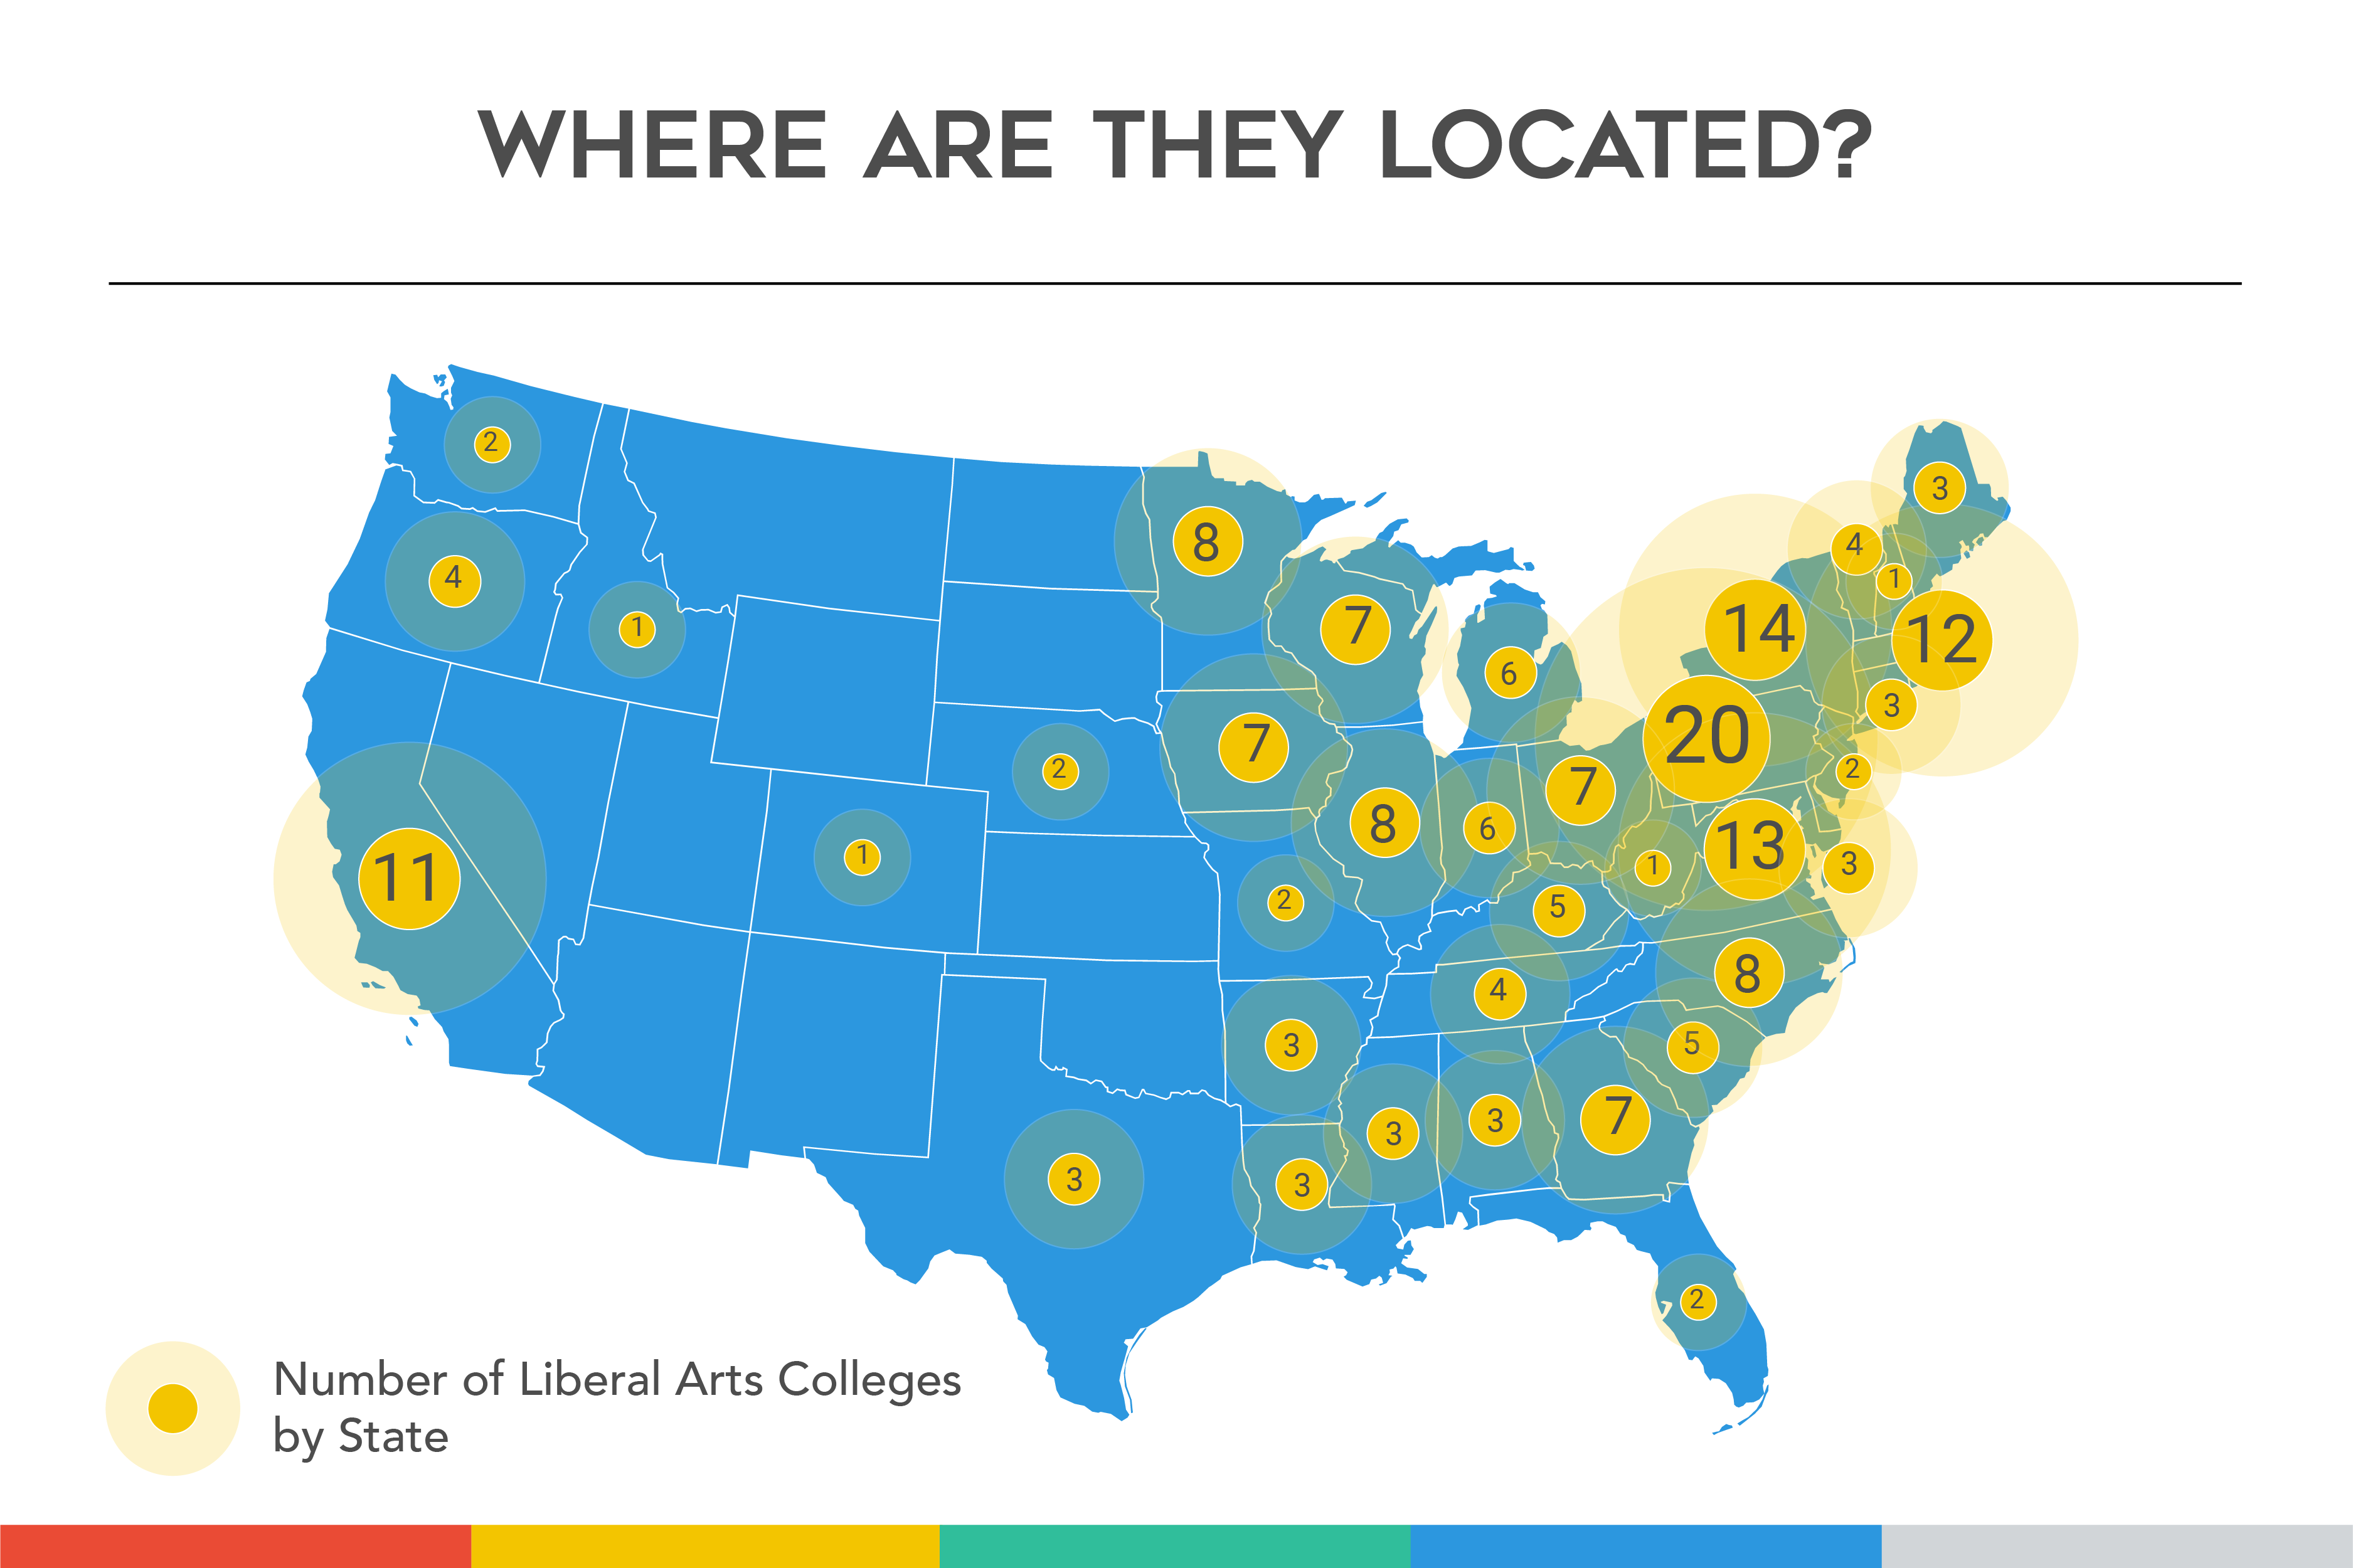 small liberal arts colleges making a big impact